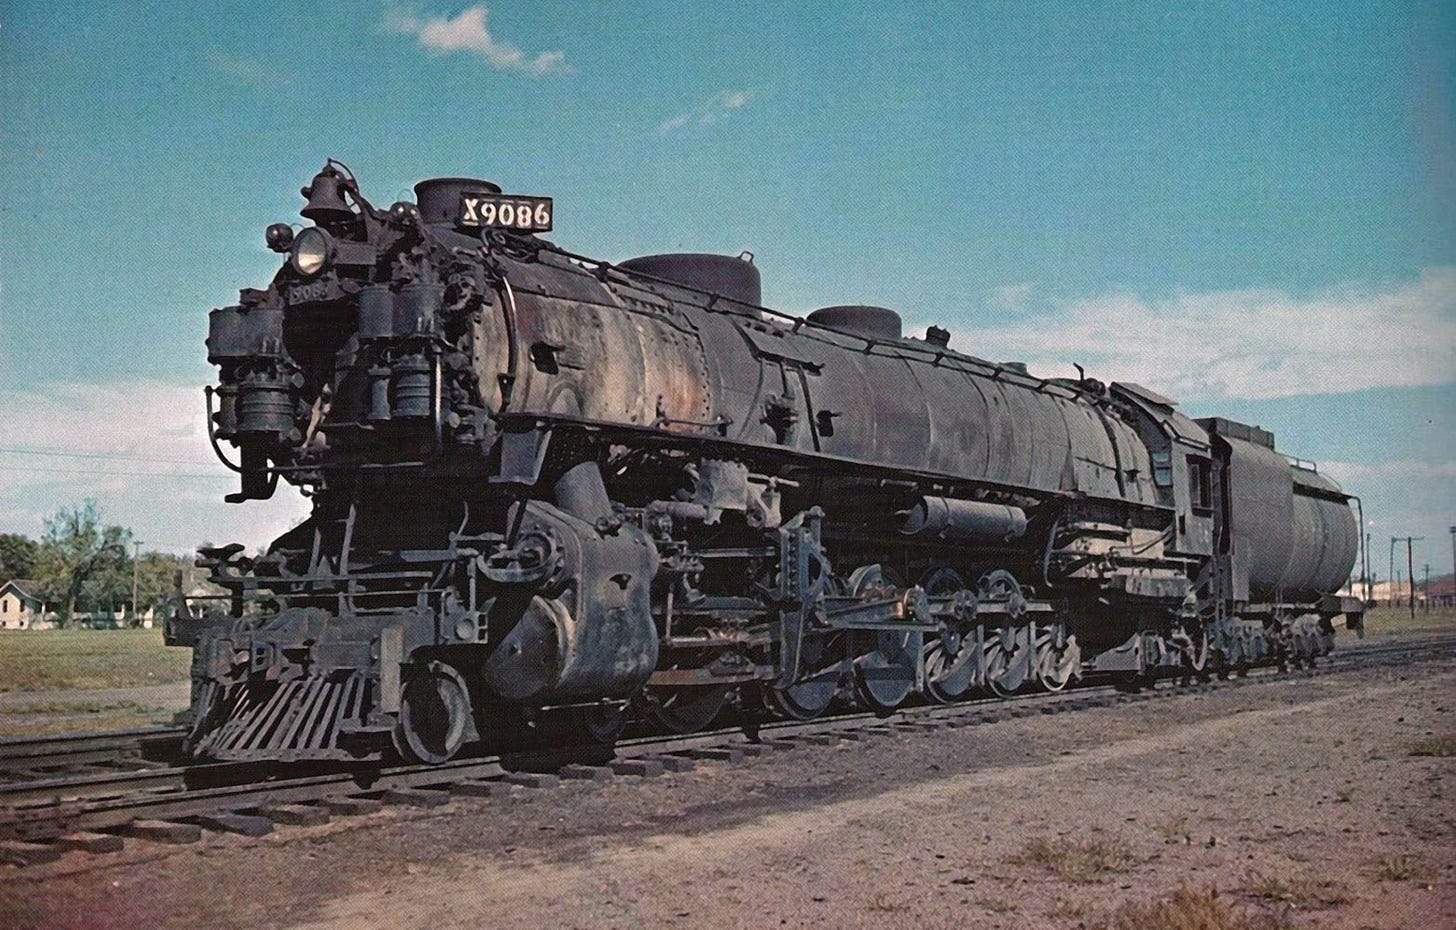 4-12-2 "Union Pacific" Locomotives: Speed, History, Images